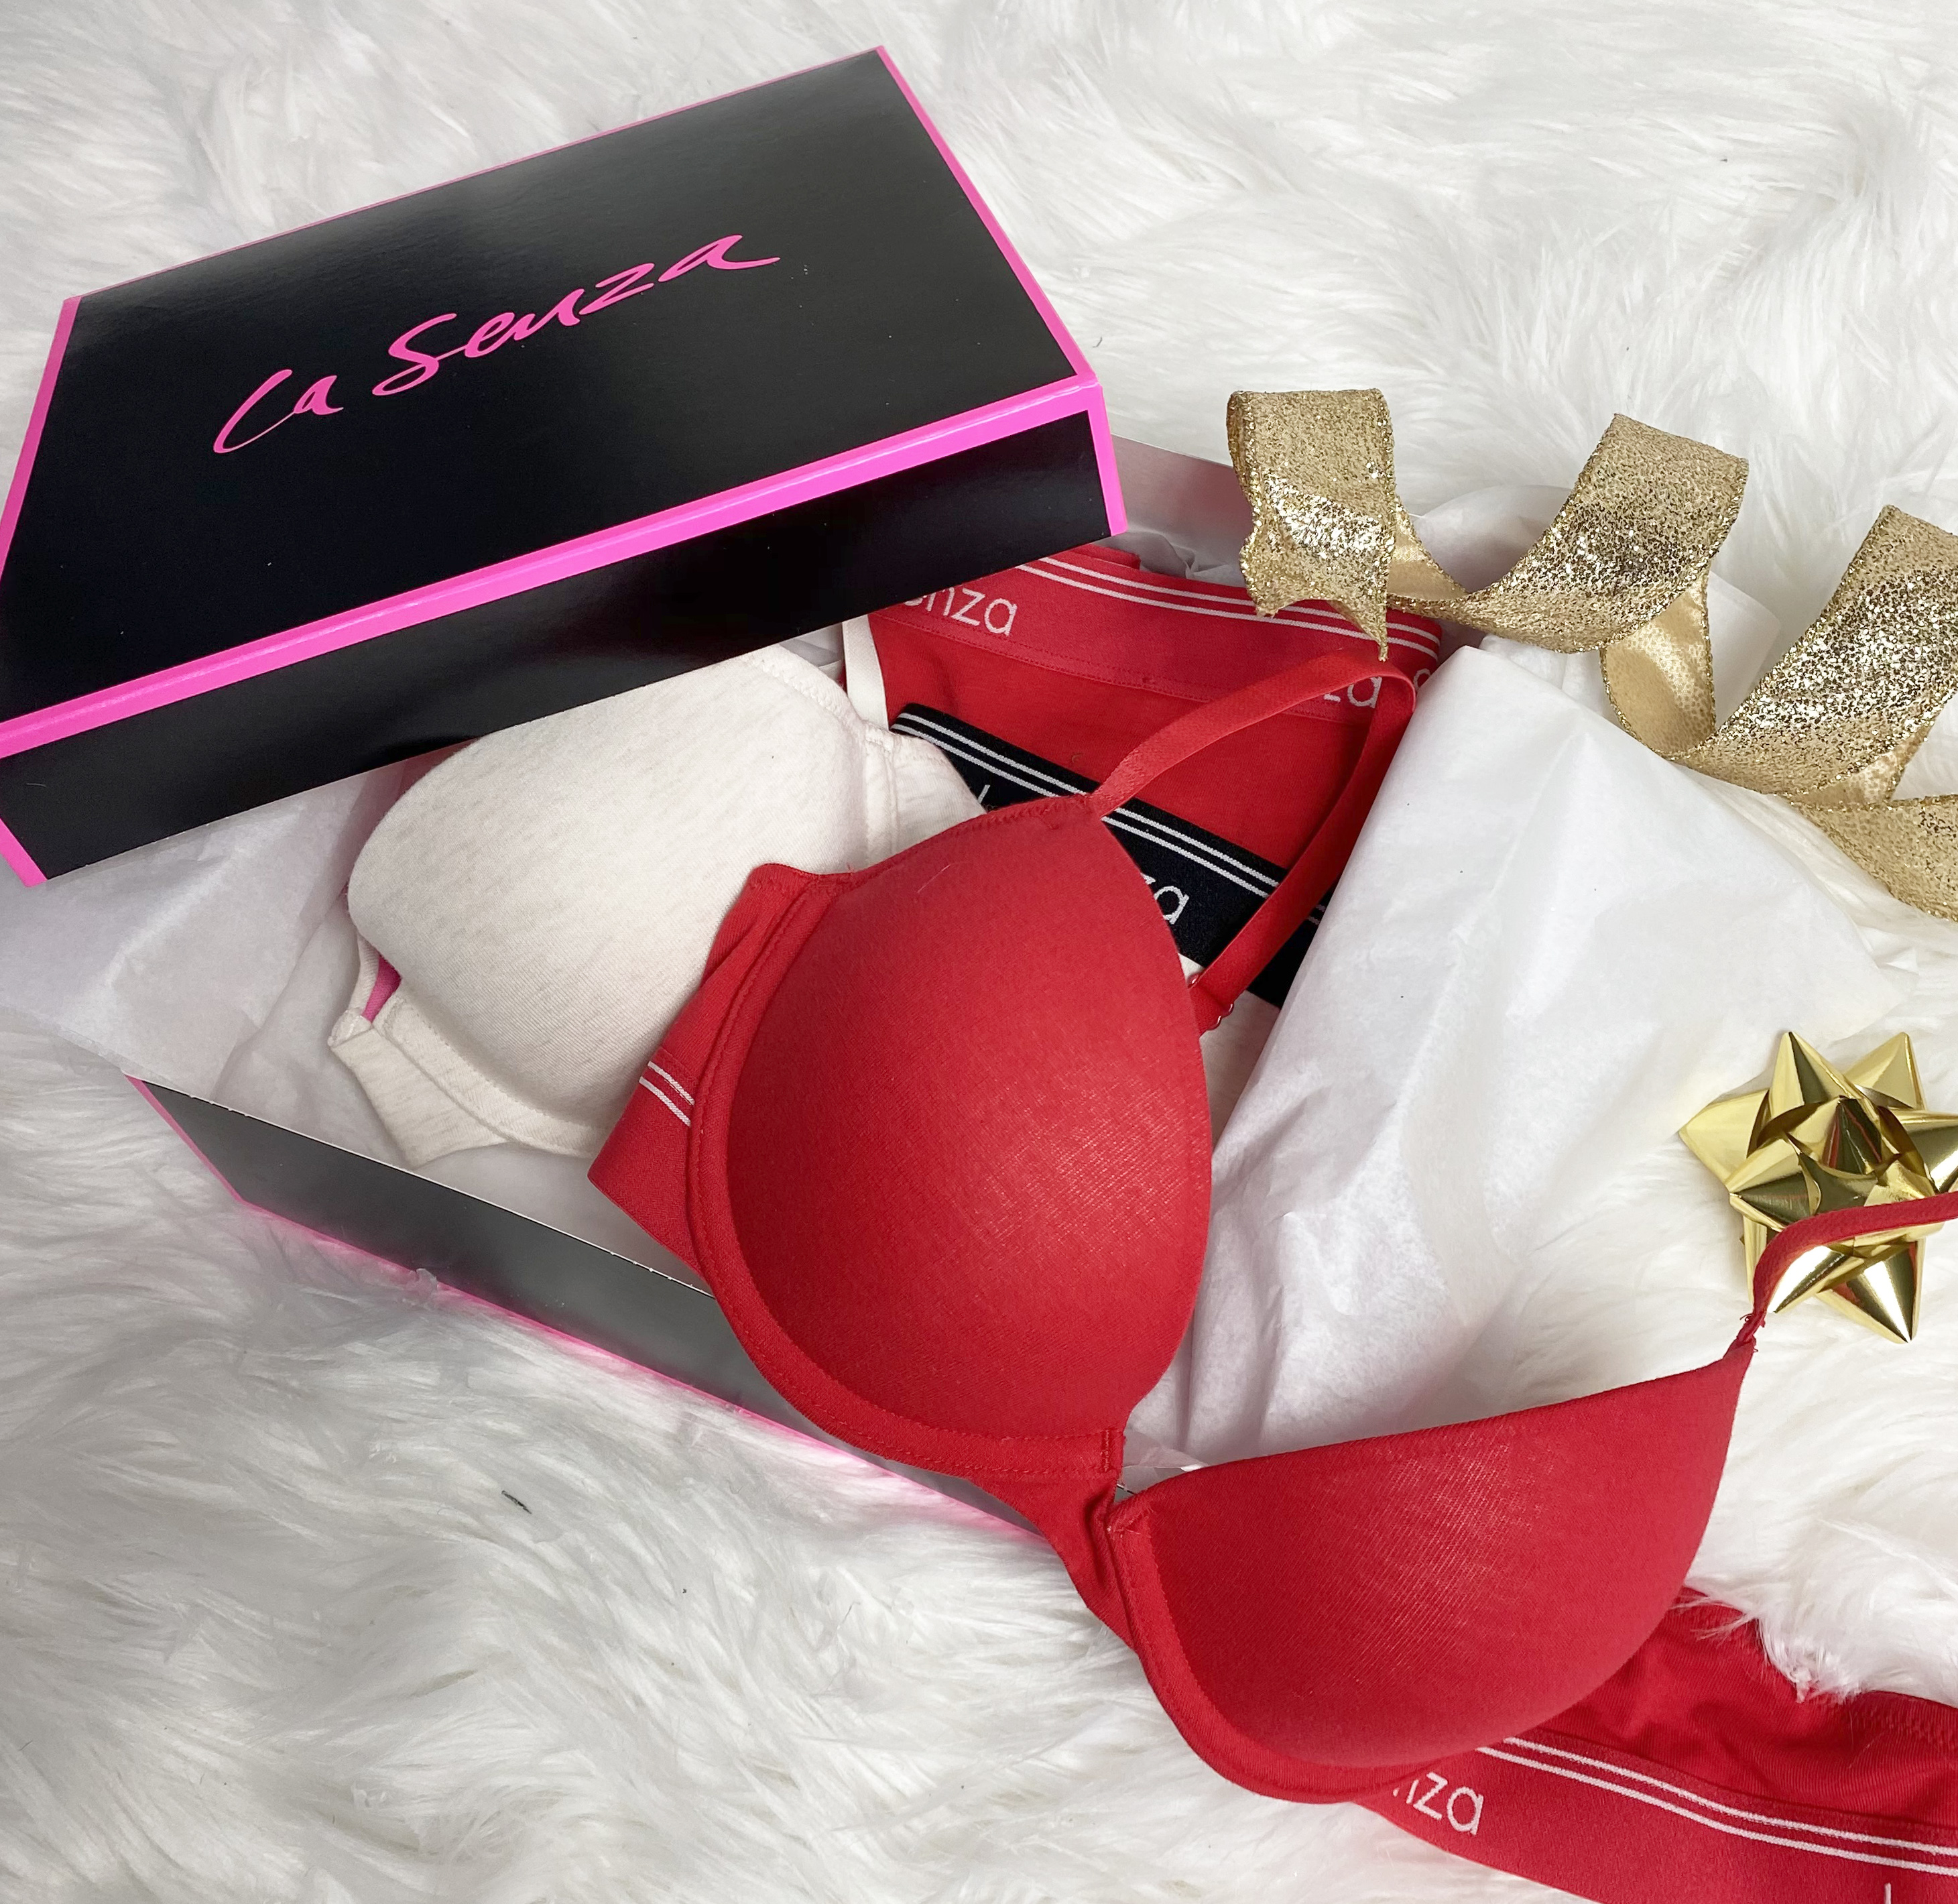 La Senza on X: NEW HOLIDAY MUST-HAVES! Shop our newest Remix bras in sexy,  cozy colours perfect for the season! PLUS! All bras are BOGO 50% off so you  can get BOTH!